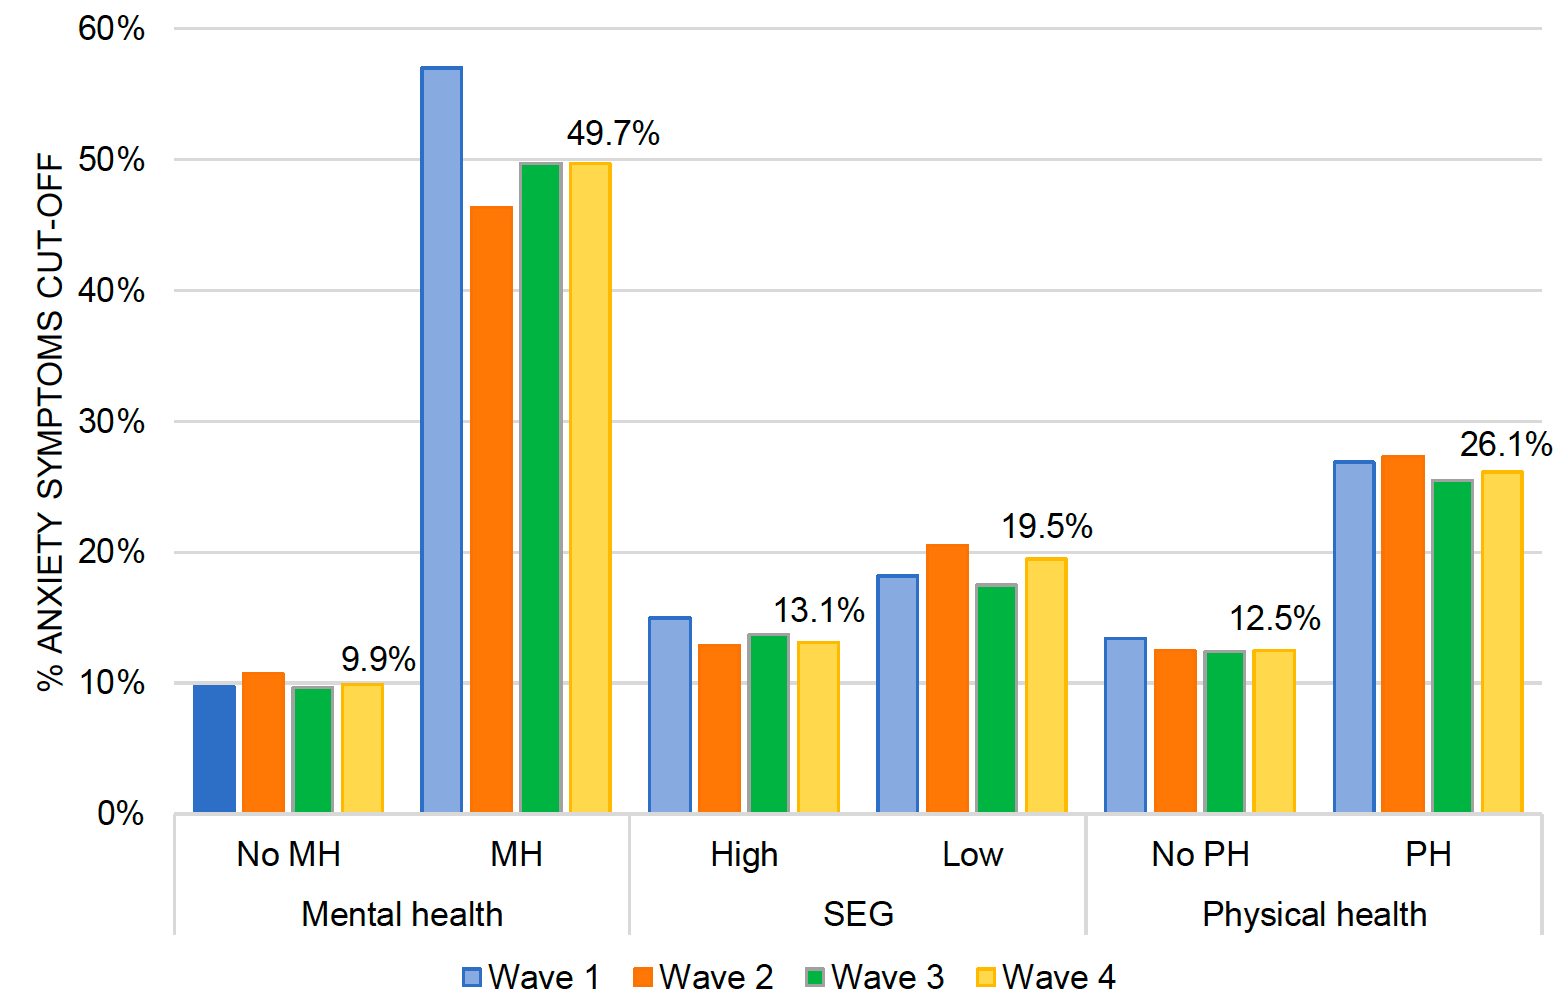 This histogram displays the percentage of reported moderate to severe anxiety symptoms in all four waves. The findings are presented separately for those who did or did not report a pre-existing mental health conditions, participants of the high or low socio-economic group and those who reported or did not report a pre-existing physical health condition. The highest rate of anxiety symptoms was found in all four waves for participants with a pre-existing mental health condition. At Wave 1, 57.0% symptoms were identified, which decreased to 46.3% at Wave 2 and increased to 49.7% at Wave 3 and Wave 4. Considerable lower rates were identified for all other groups. Participants with a pre-existing physical health condition reported 26.9% moderate to severe anxiety symptoms at Wave 1, 27.3% at Wave 2, 25.5% at Wave 3 and 26.1% at Wave 4. People from the low socio-economic group reported 18.2% moderate to severe anxiety symptoms at Wave 1, 20.5% at Wave 2, 17.5% at Wave 3 and 19.5% at Wave 4. In comparison, participants from a high socio-economic group reported 15.0% anxiety symptoms at Wave 1, 12.9% at Wave 2, 13.7% at Wave 3 and 13.1% at Wave 4. Participants without a physical health condition showed 13.4% anxiety symptoms at Wave 1, 12.5% at Wave 2, 12.4% at Wave 3 and 12.5% at Wave 4. Finally, participants without a pre-existing mental health condition reported only 9.7% moderate to severe anxiety symptoms at Wave 1, 10.7% at Wave 2, 9.7% at Wave 3 and 9.9% at Wave 4. 